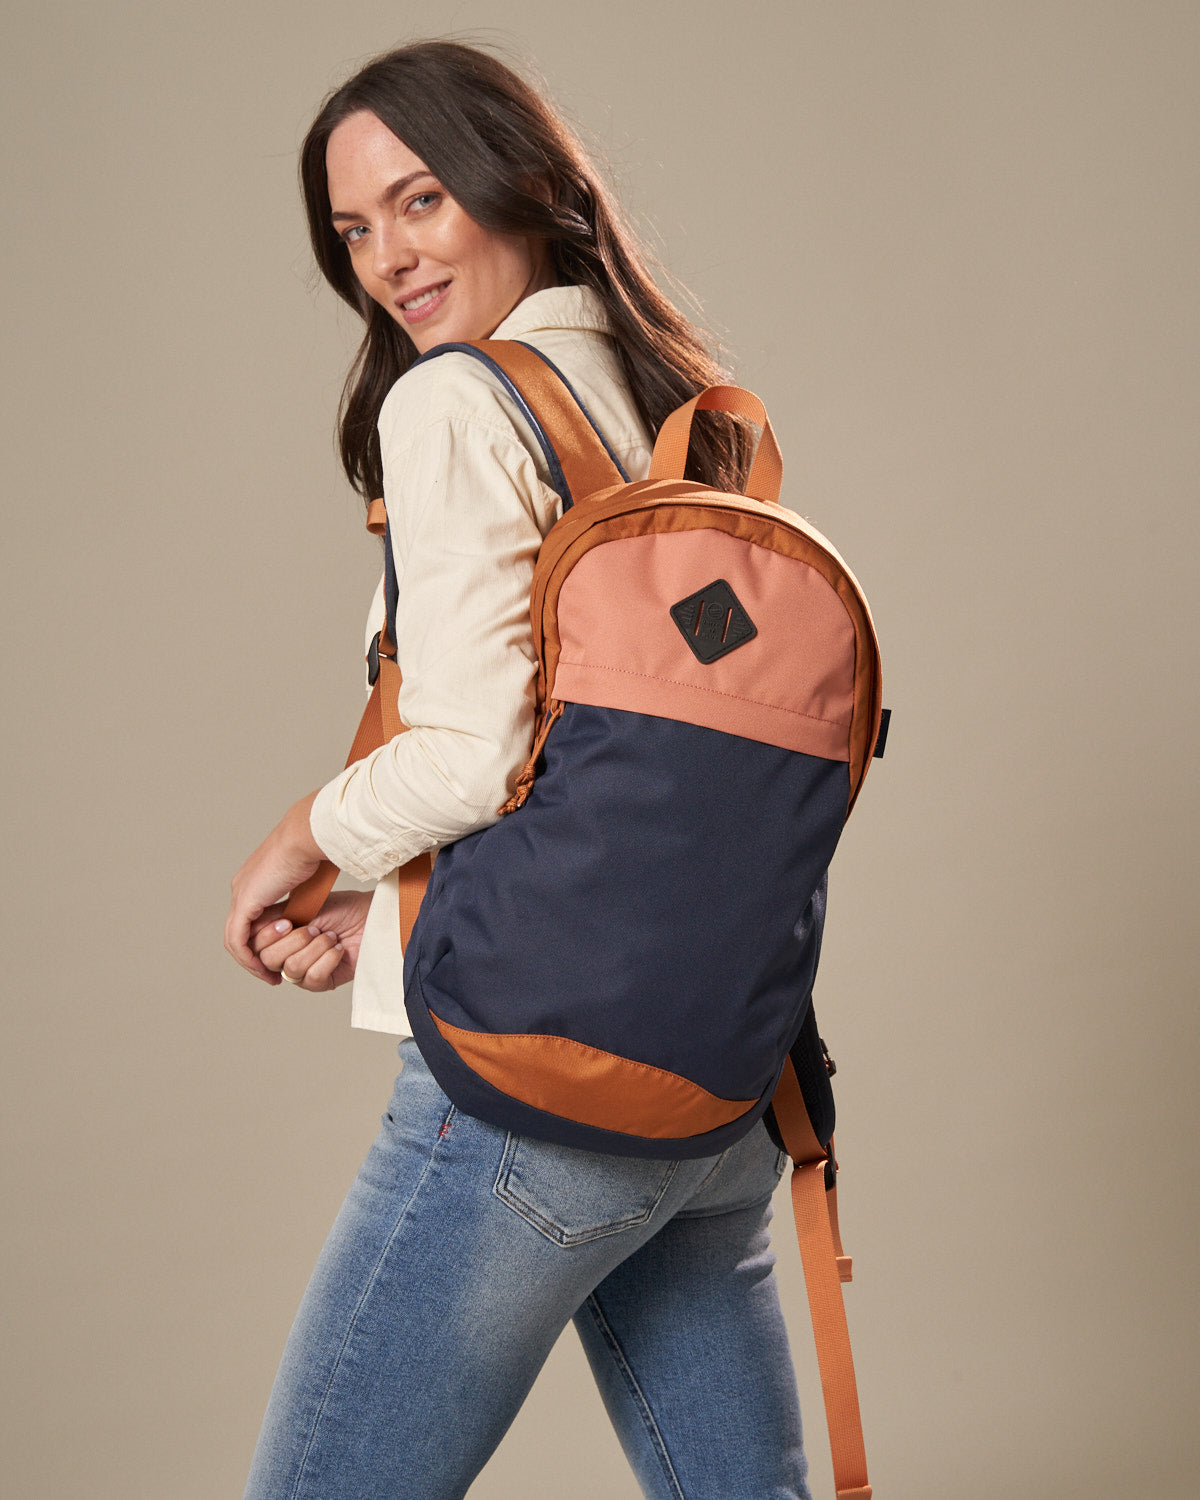 Commuter Convertible Backpack in BROWN